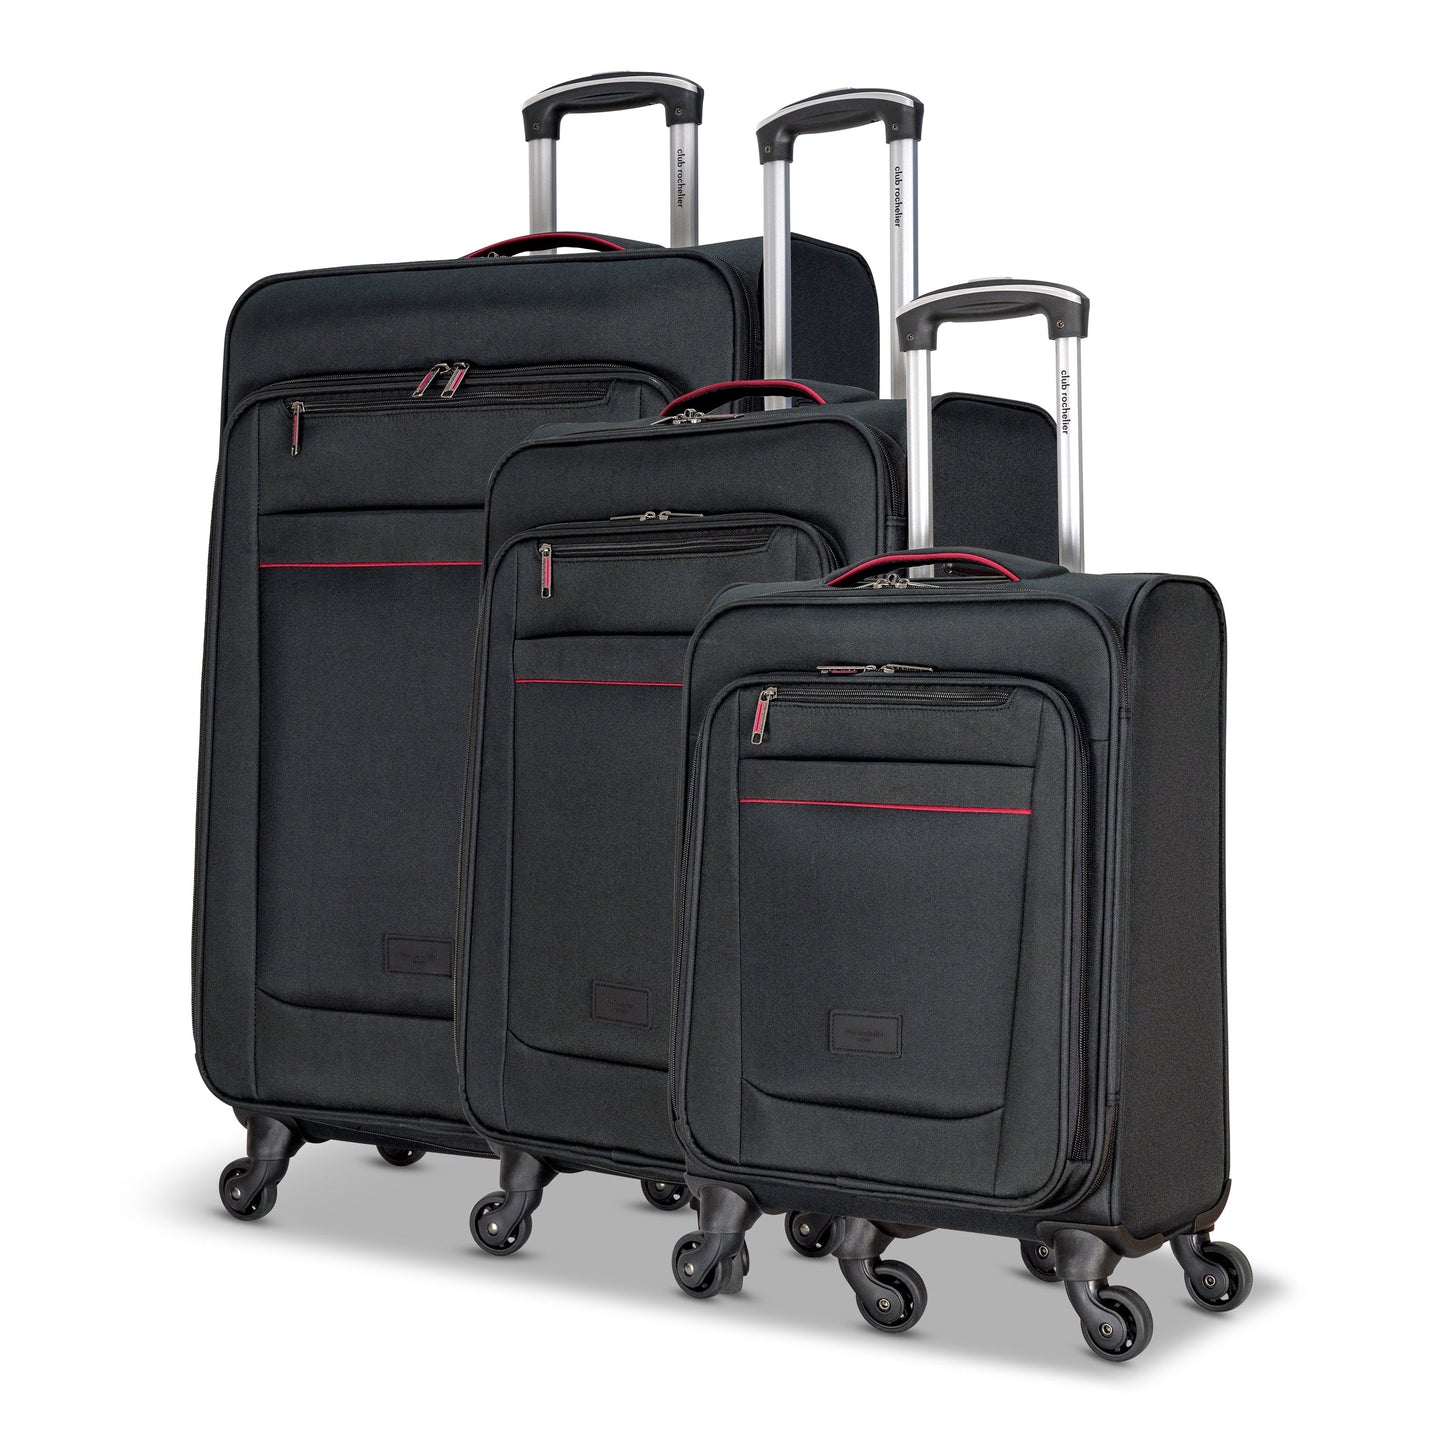 Travel 3 Piece Set Luggage with Contrast Piped Trim Periwinkle Zeus